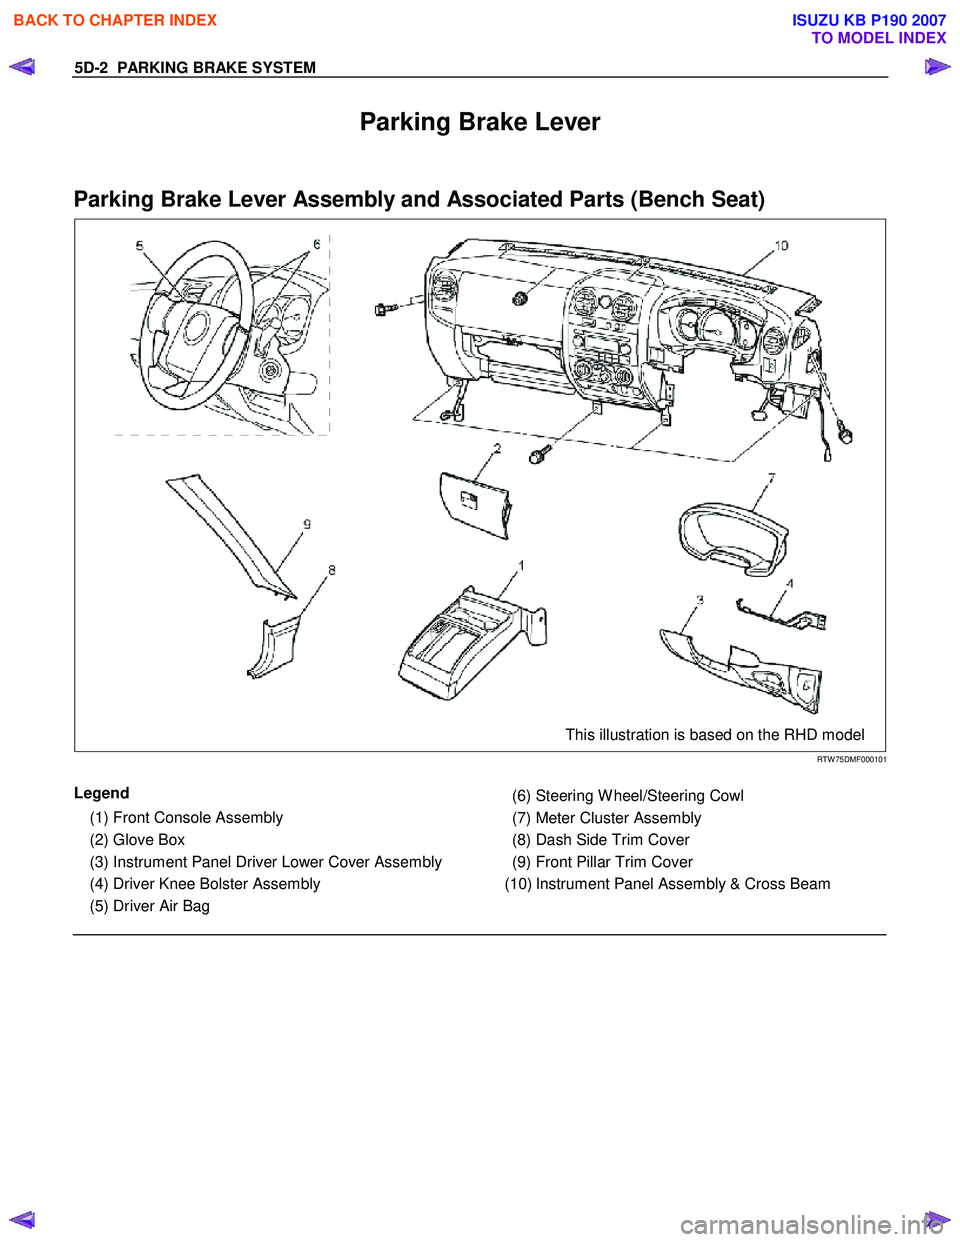 ISUZU KB P190 2007  Workshop Repair Manual 5D-2  PARKING BRAKE SYSTEM 
Parking Brake Lever 
Parking Brake Lever Assembly and Associated Parts (Bench Seat)  
  
 
This illustration is based on the RHD model
 
RTW 75DMF000101 
 
Legend  
  (1)  